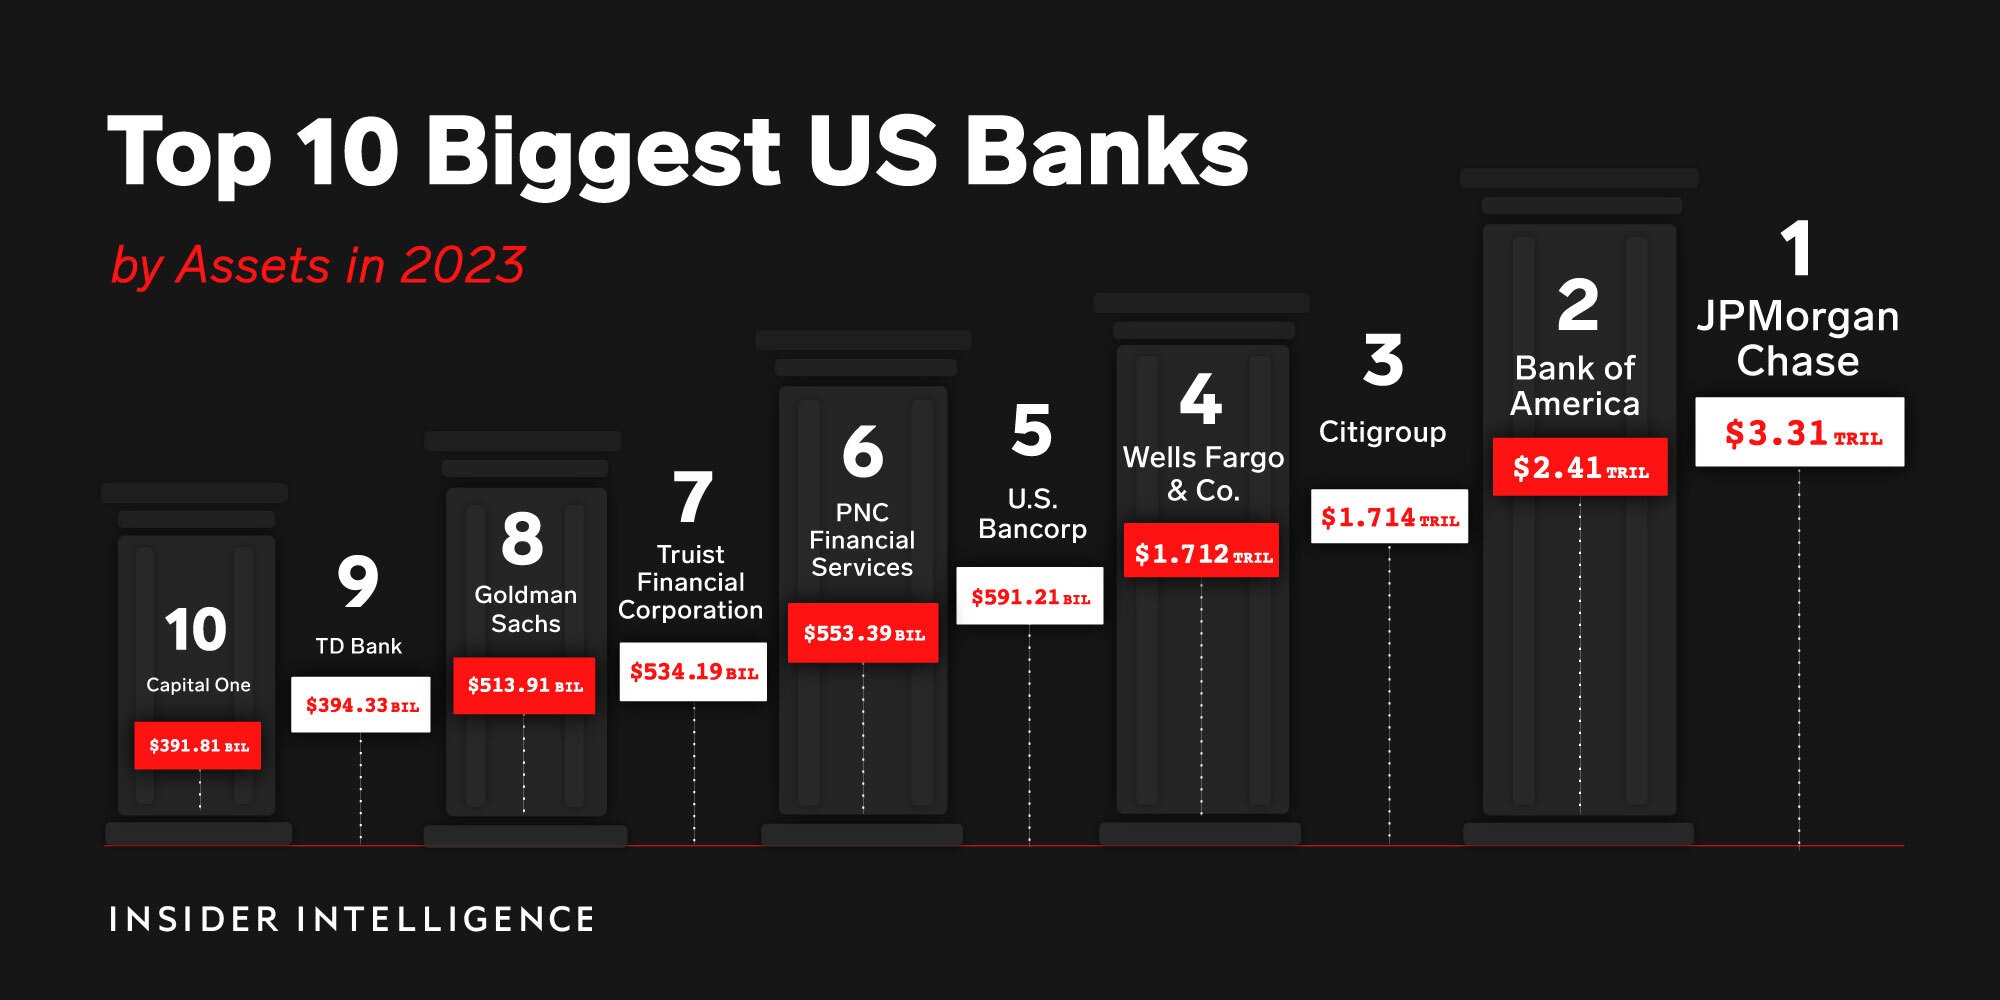 US Banking Industry in Turmoil: A Comprehensive Look at the 'Great Consolidation' and Largest Bank Failures of 2023